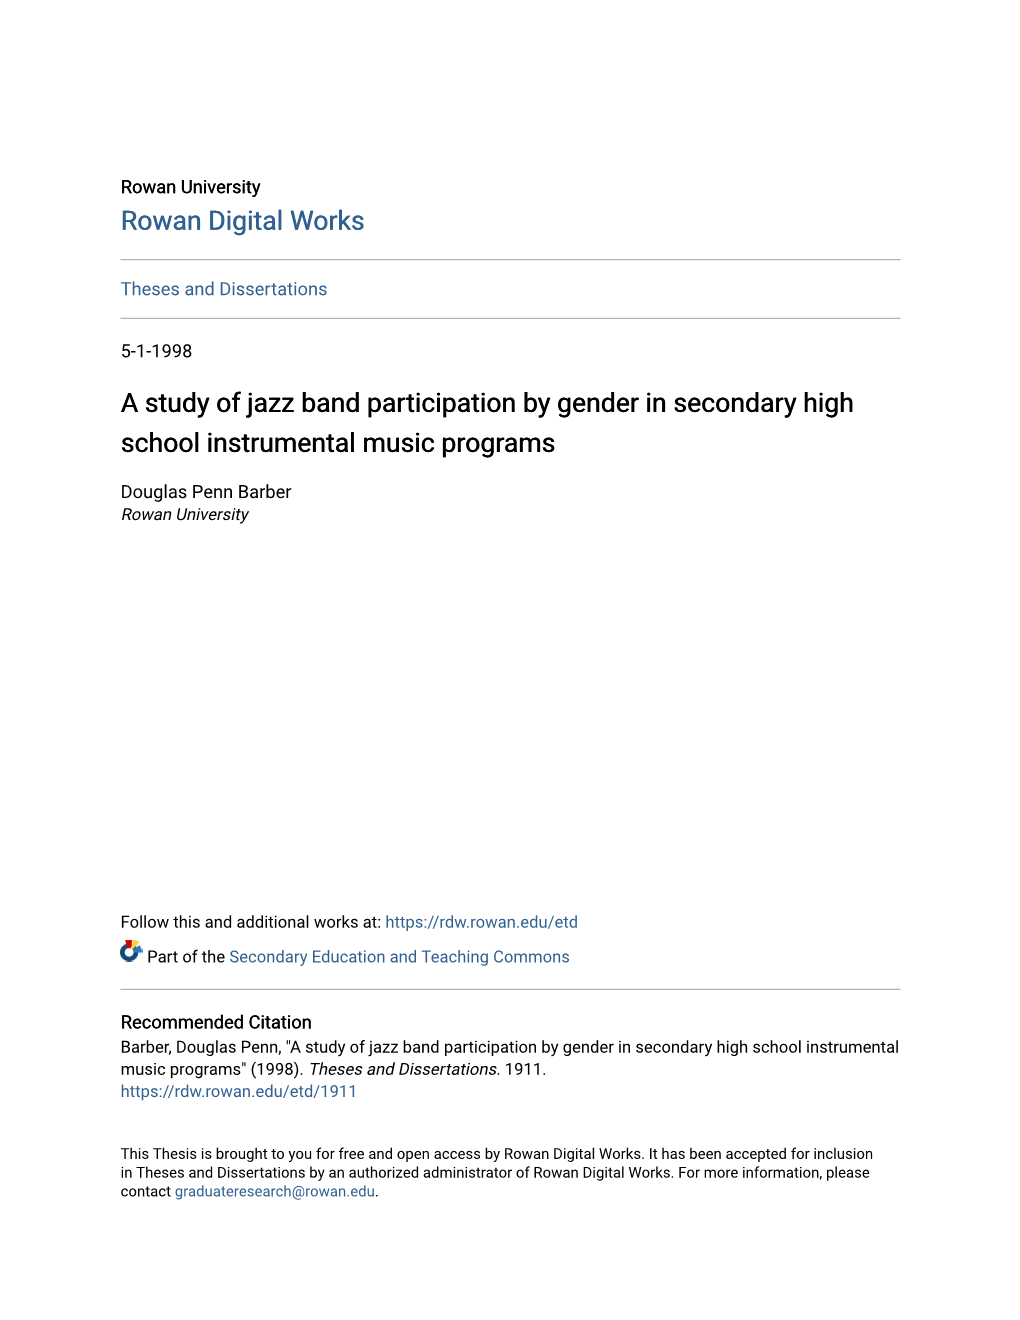 A Study of Jazz Band Participation by Gender in Secondary High School Instrumental Music Programs